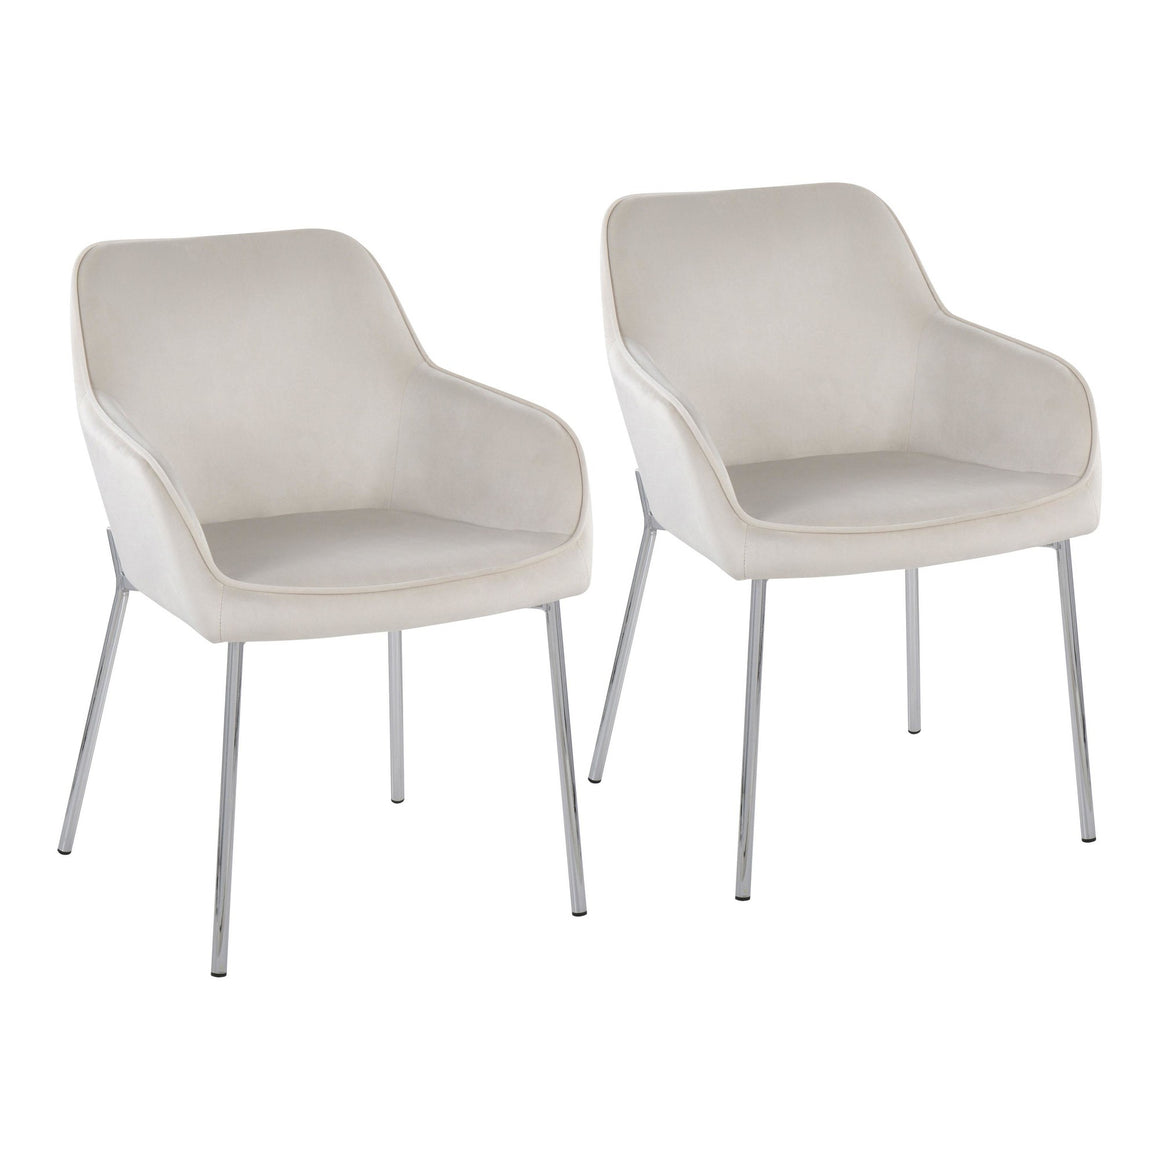 Daniella Contemporary Dining Chair in Chrome Steel and Cream Velvet by LumiSource - Set of 2